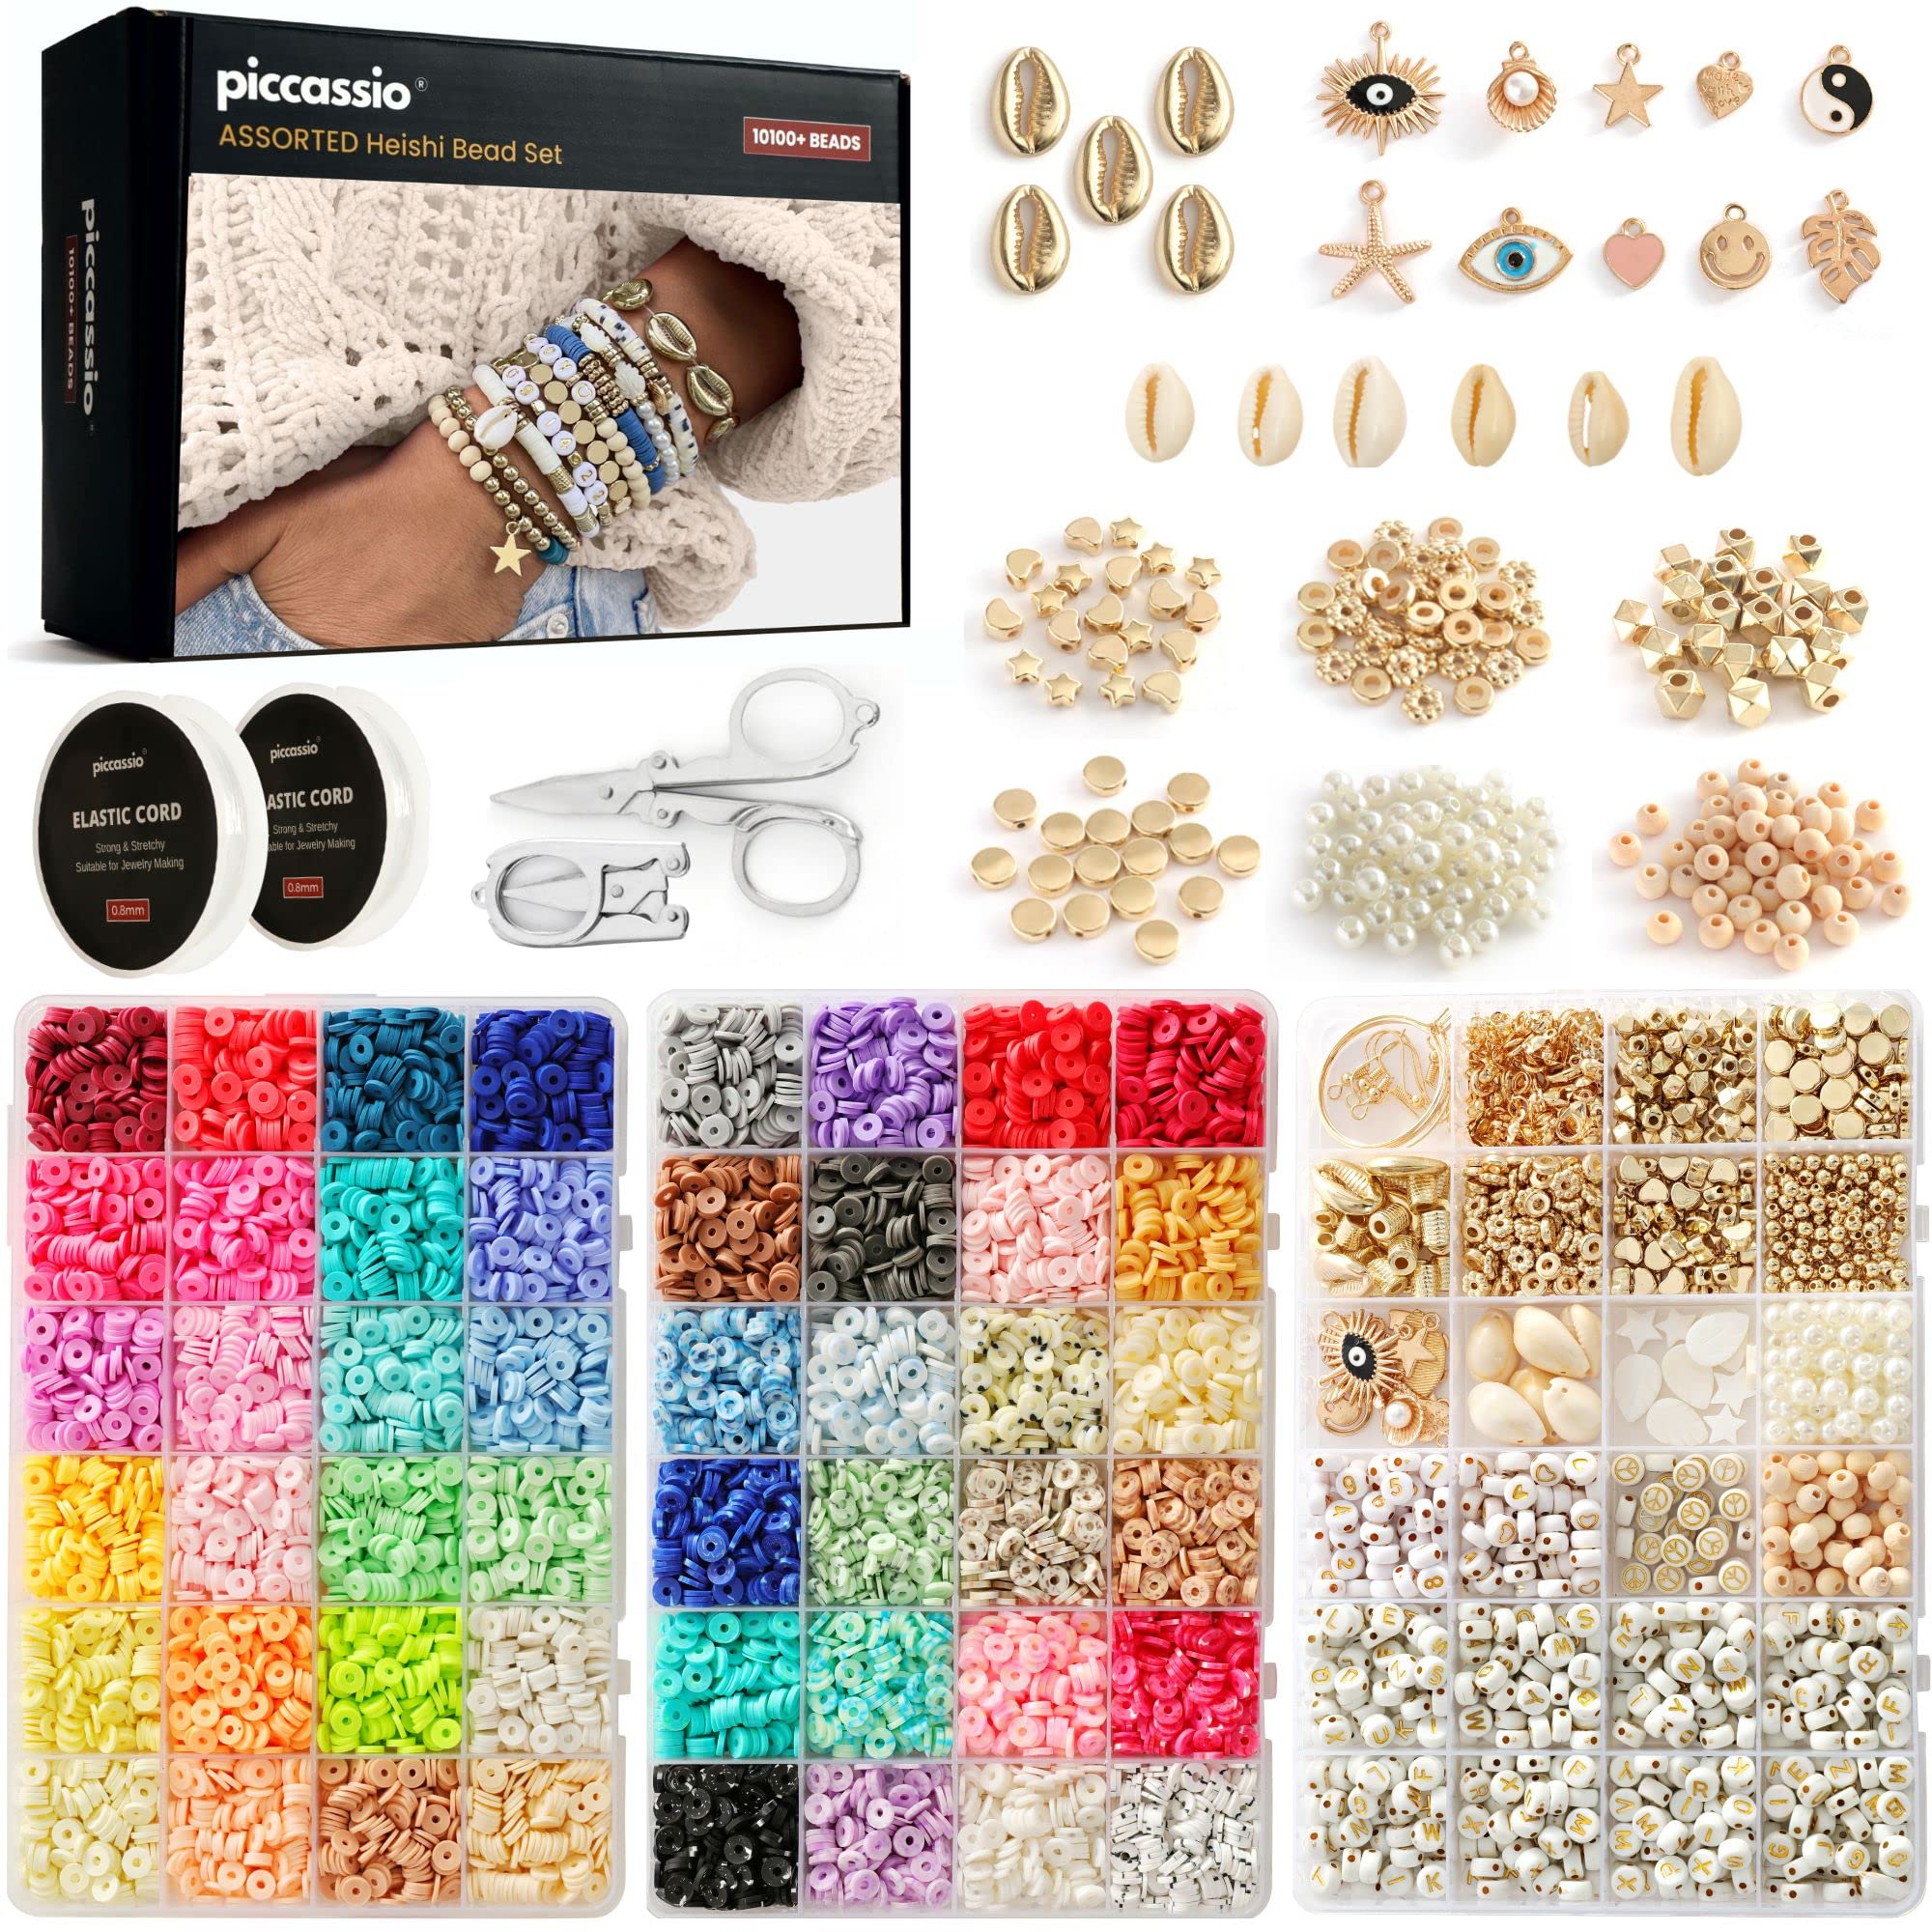 ANDYKEN Beads for Kids Crafts - Jewelry Making Kits Colorful Acrylic Girls  Bead Set Jewelry Crafting Set DIY Bead Jewelry Making Kit for Kids Girls